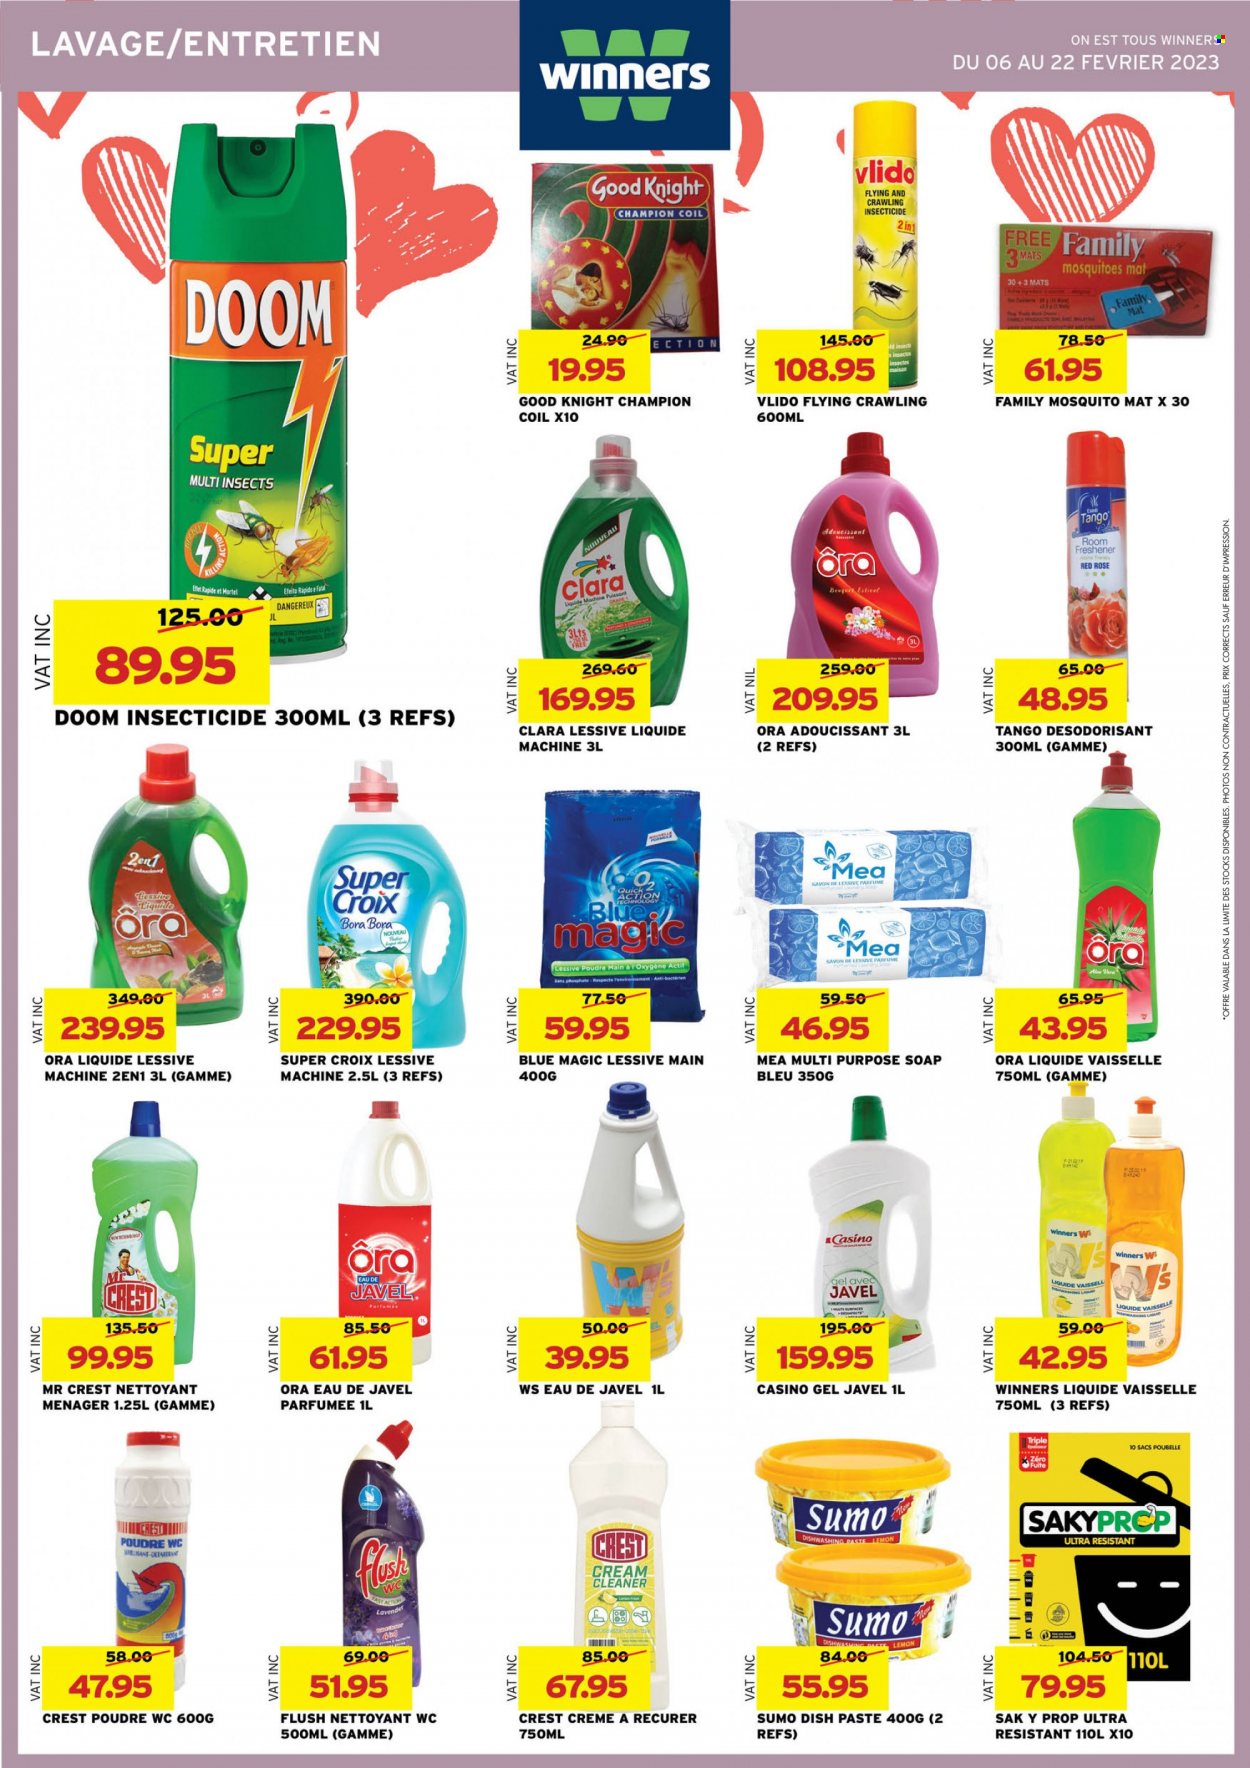 thumbnail - Winner's Catalogue - 6.02.2023 - 22.02.2023 - Sales products - Ace, wine, rosé wine, cream cleaner, cleaner, dishwashing liquid, soap, Crest, tray. Page 22.